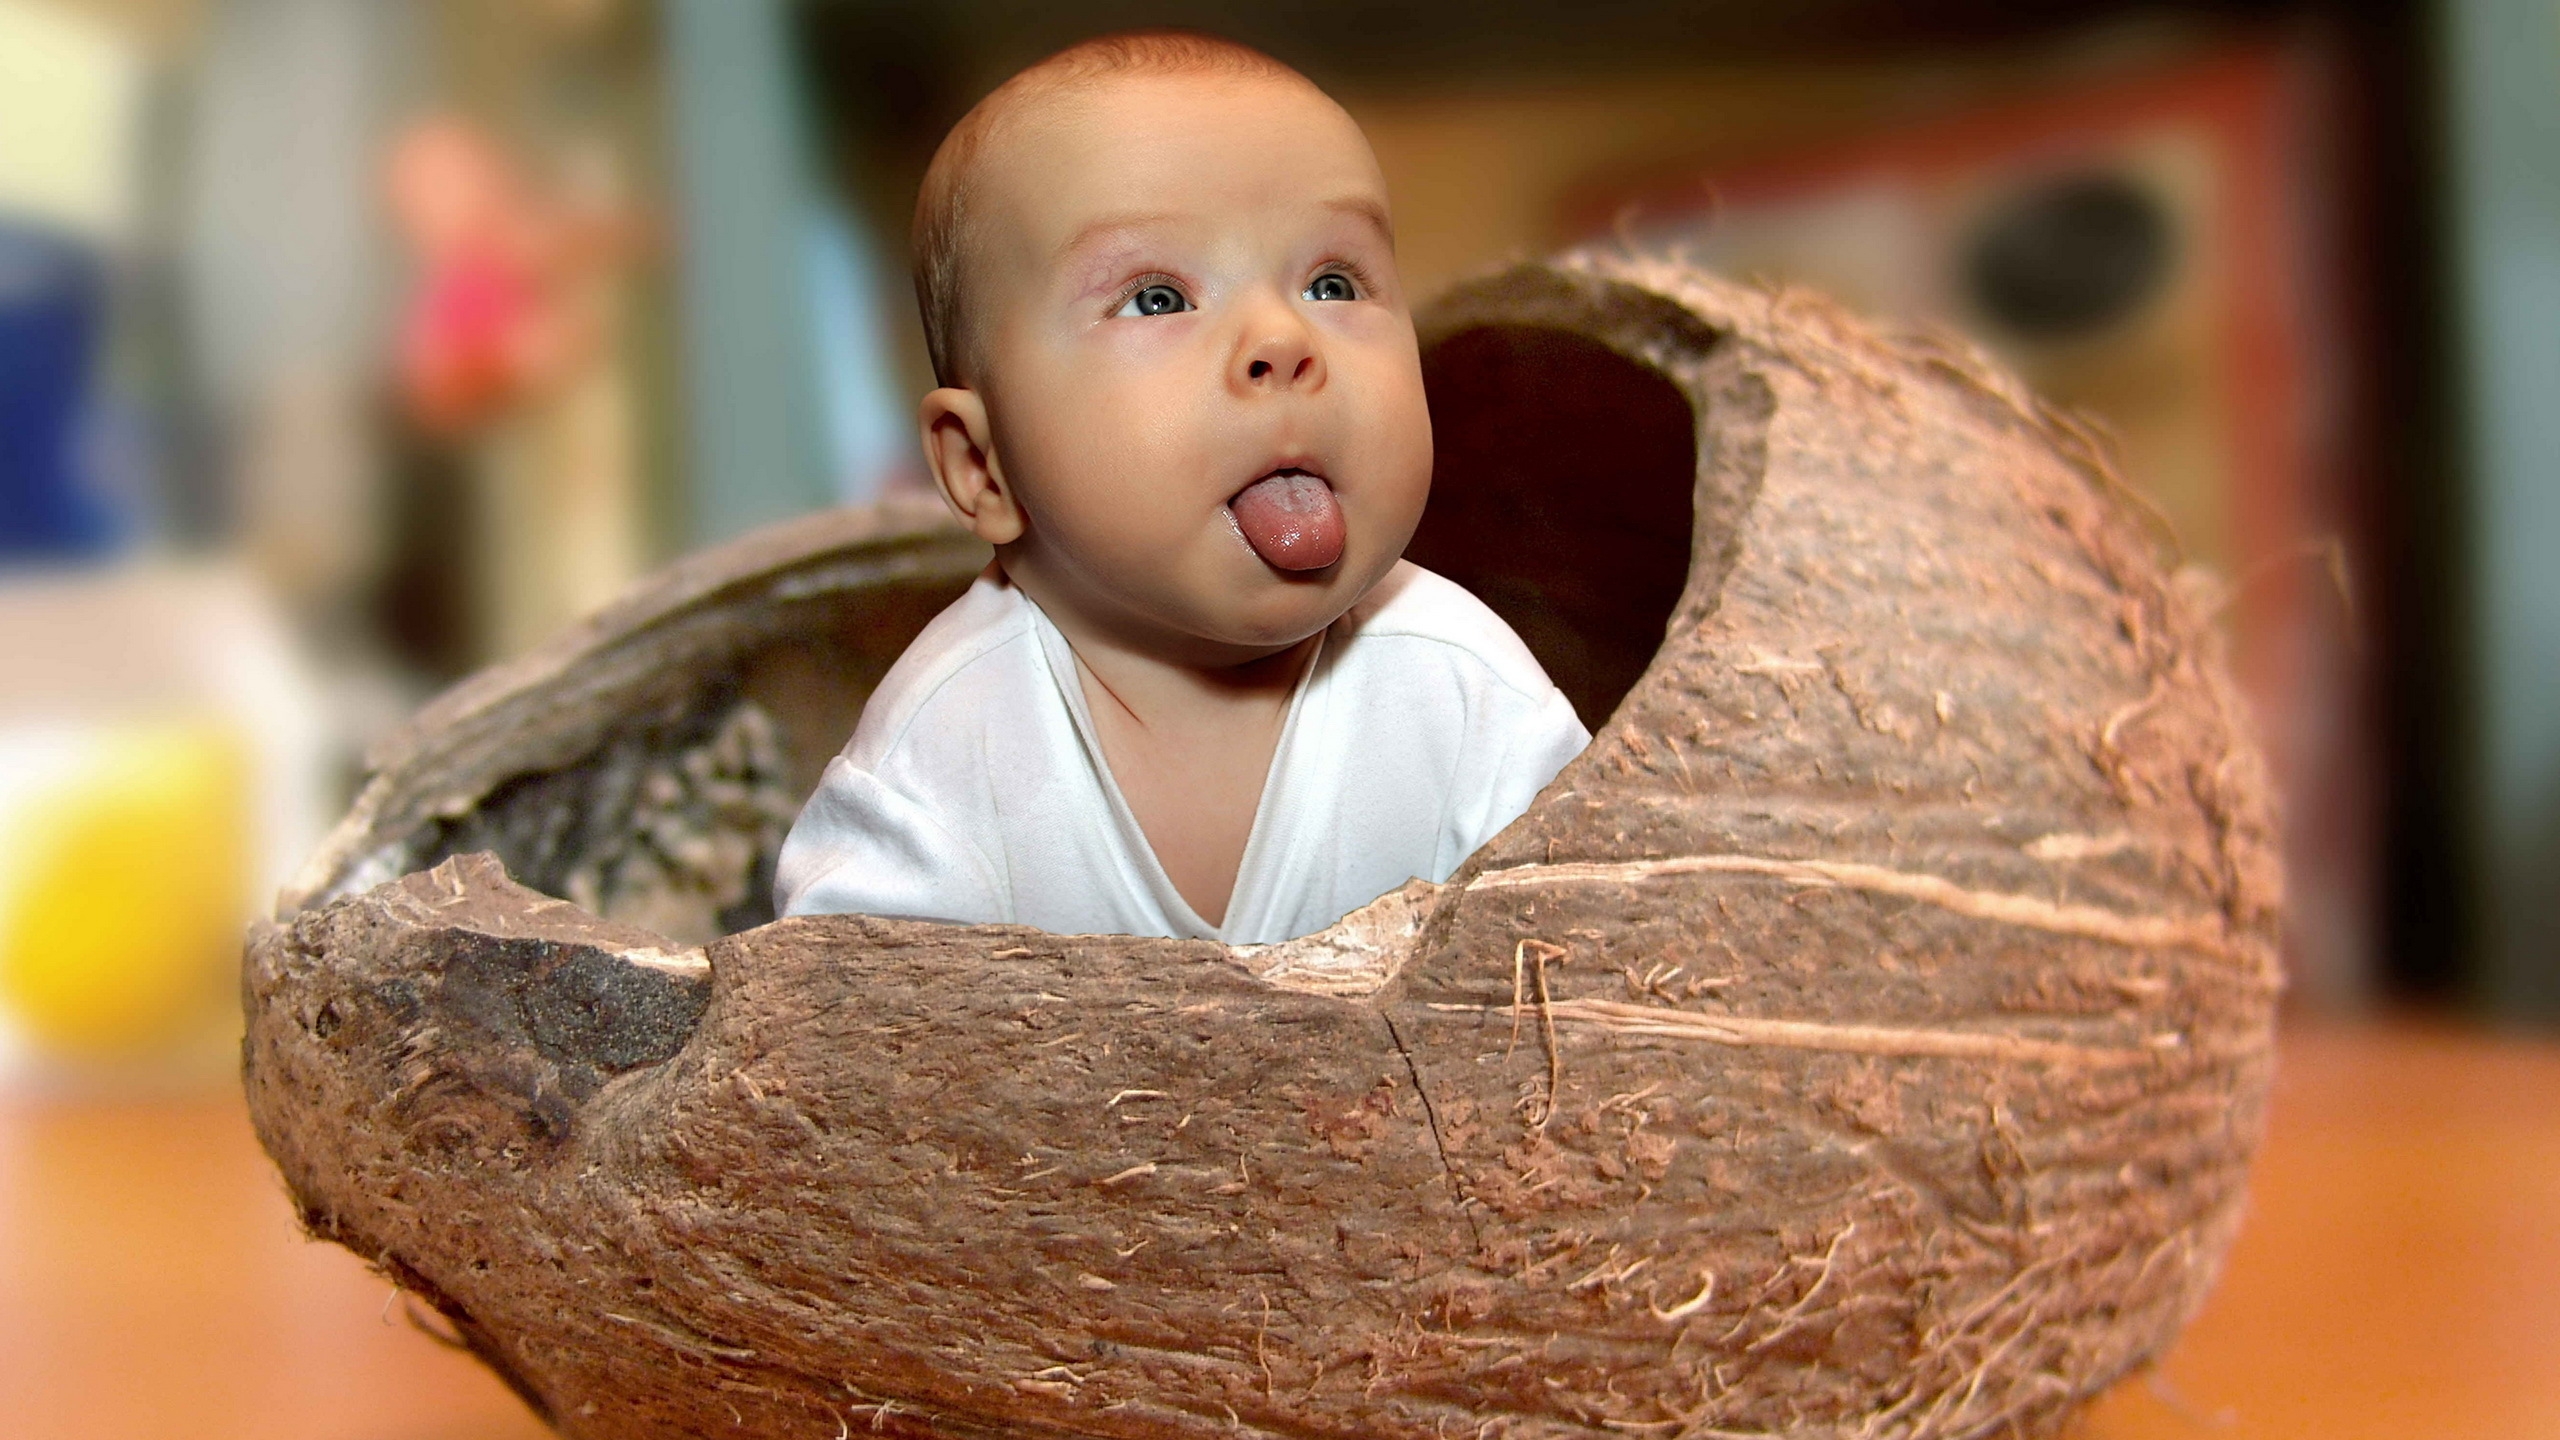 Baby Coconut for 2560x1440 HDTV resolution